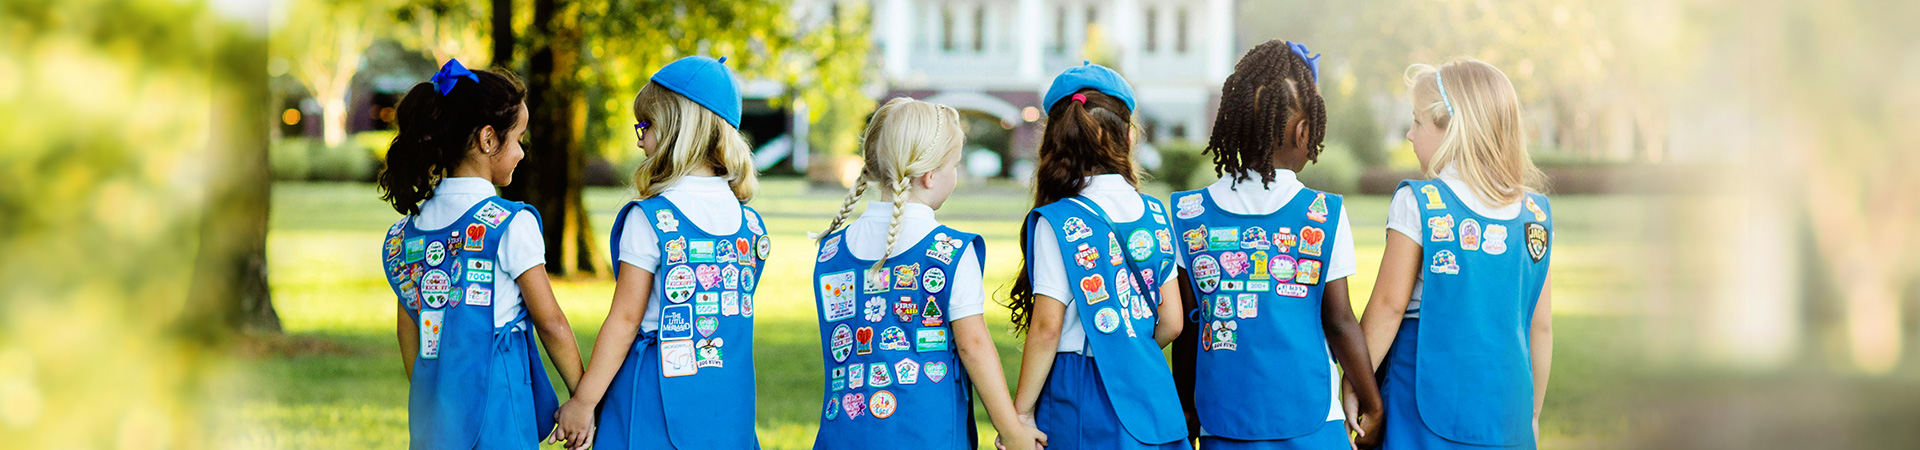  Group of Daisy Girl Scouts facing with their backs to us in uniform  